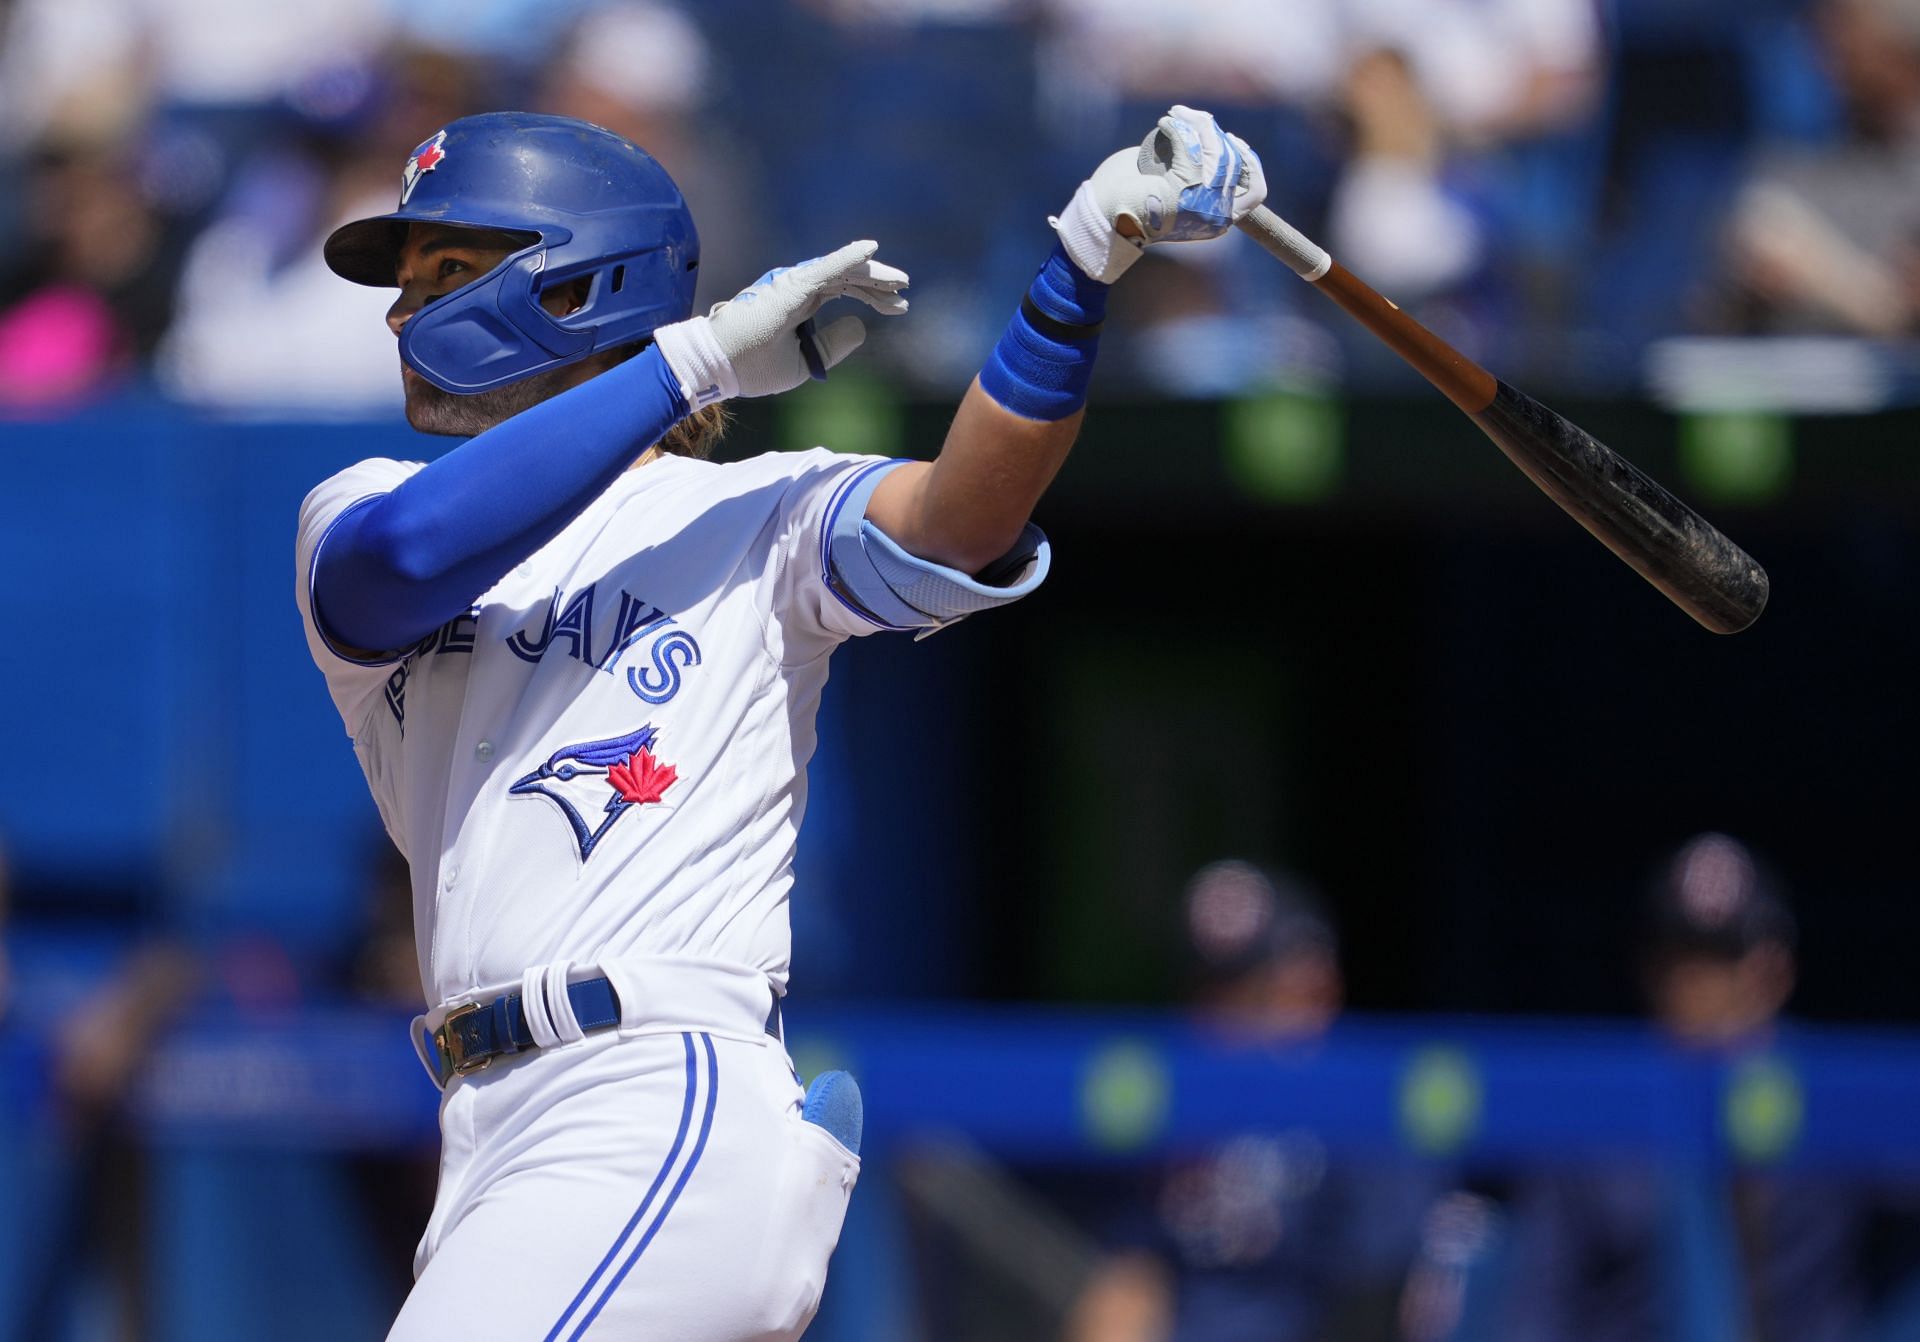 Bichette crushed a grand slam in today&#039;s Toronto Blue Jays game.